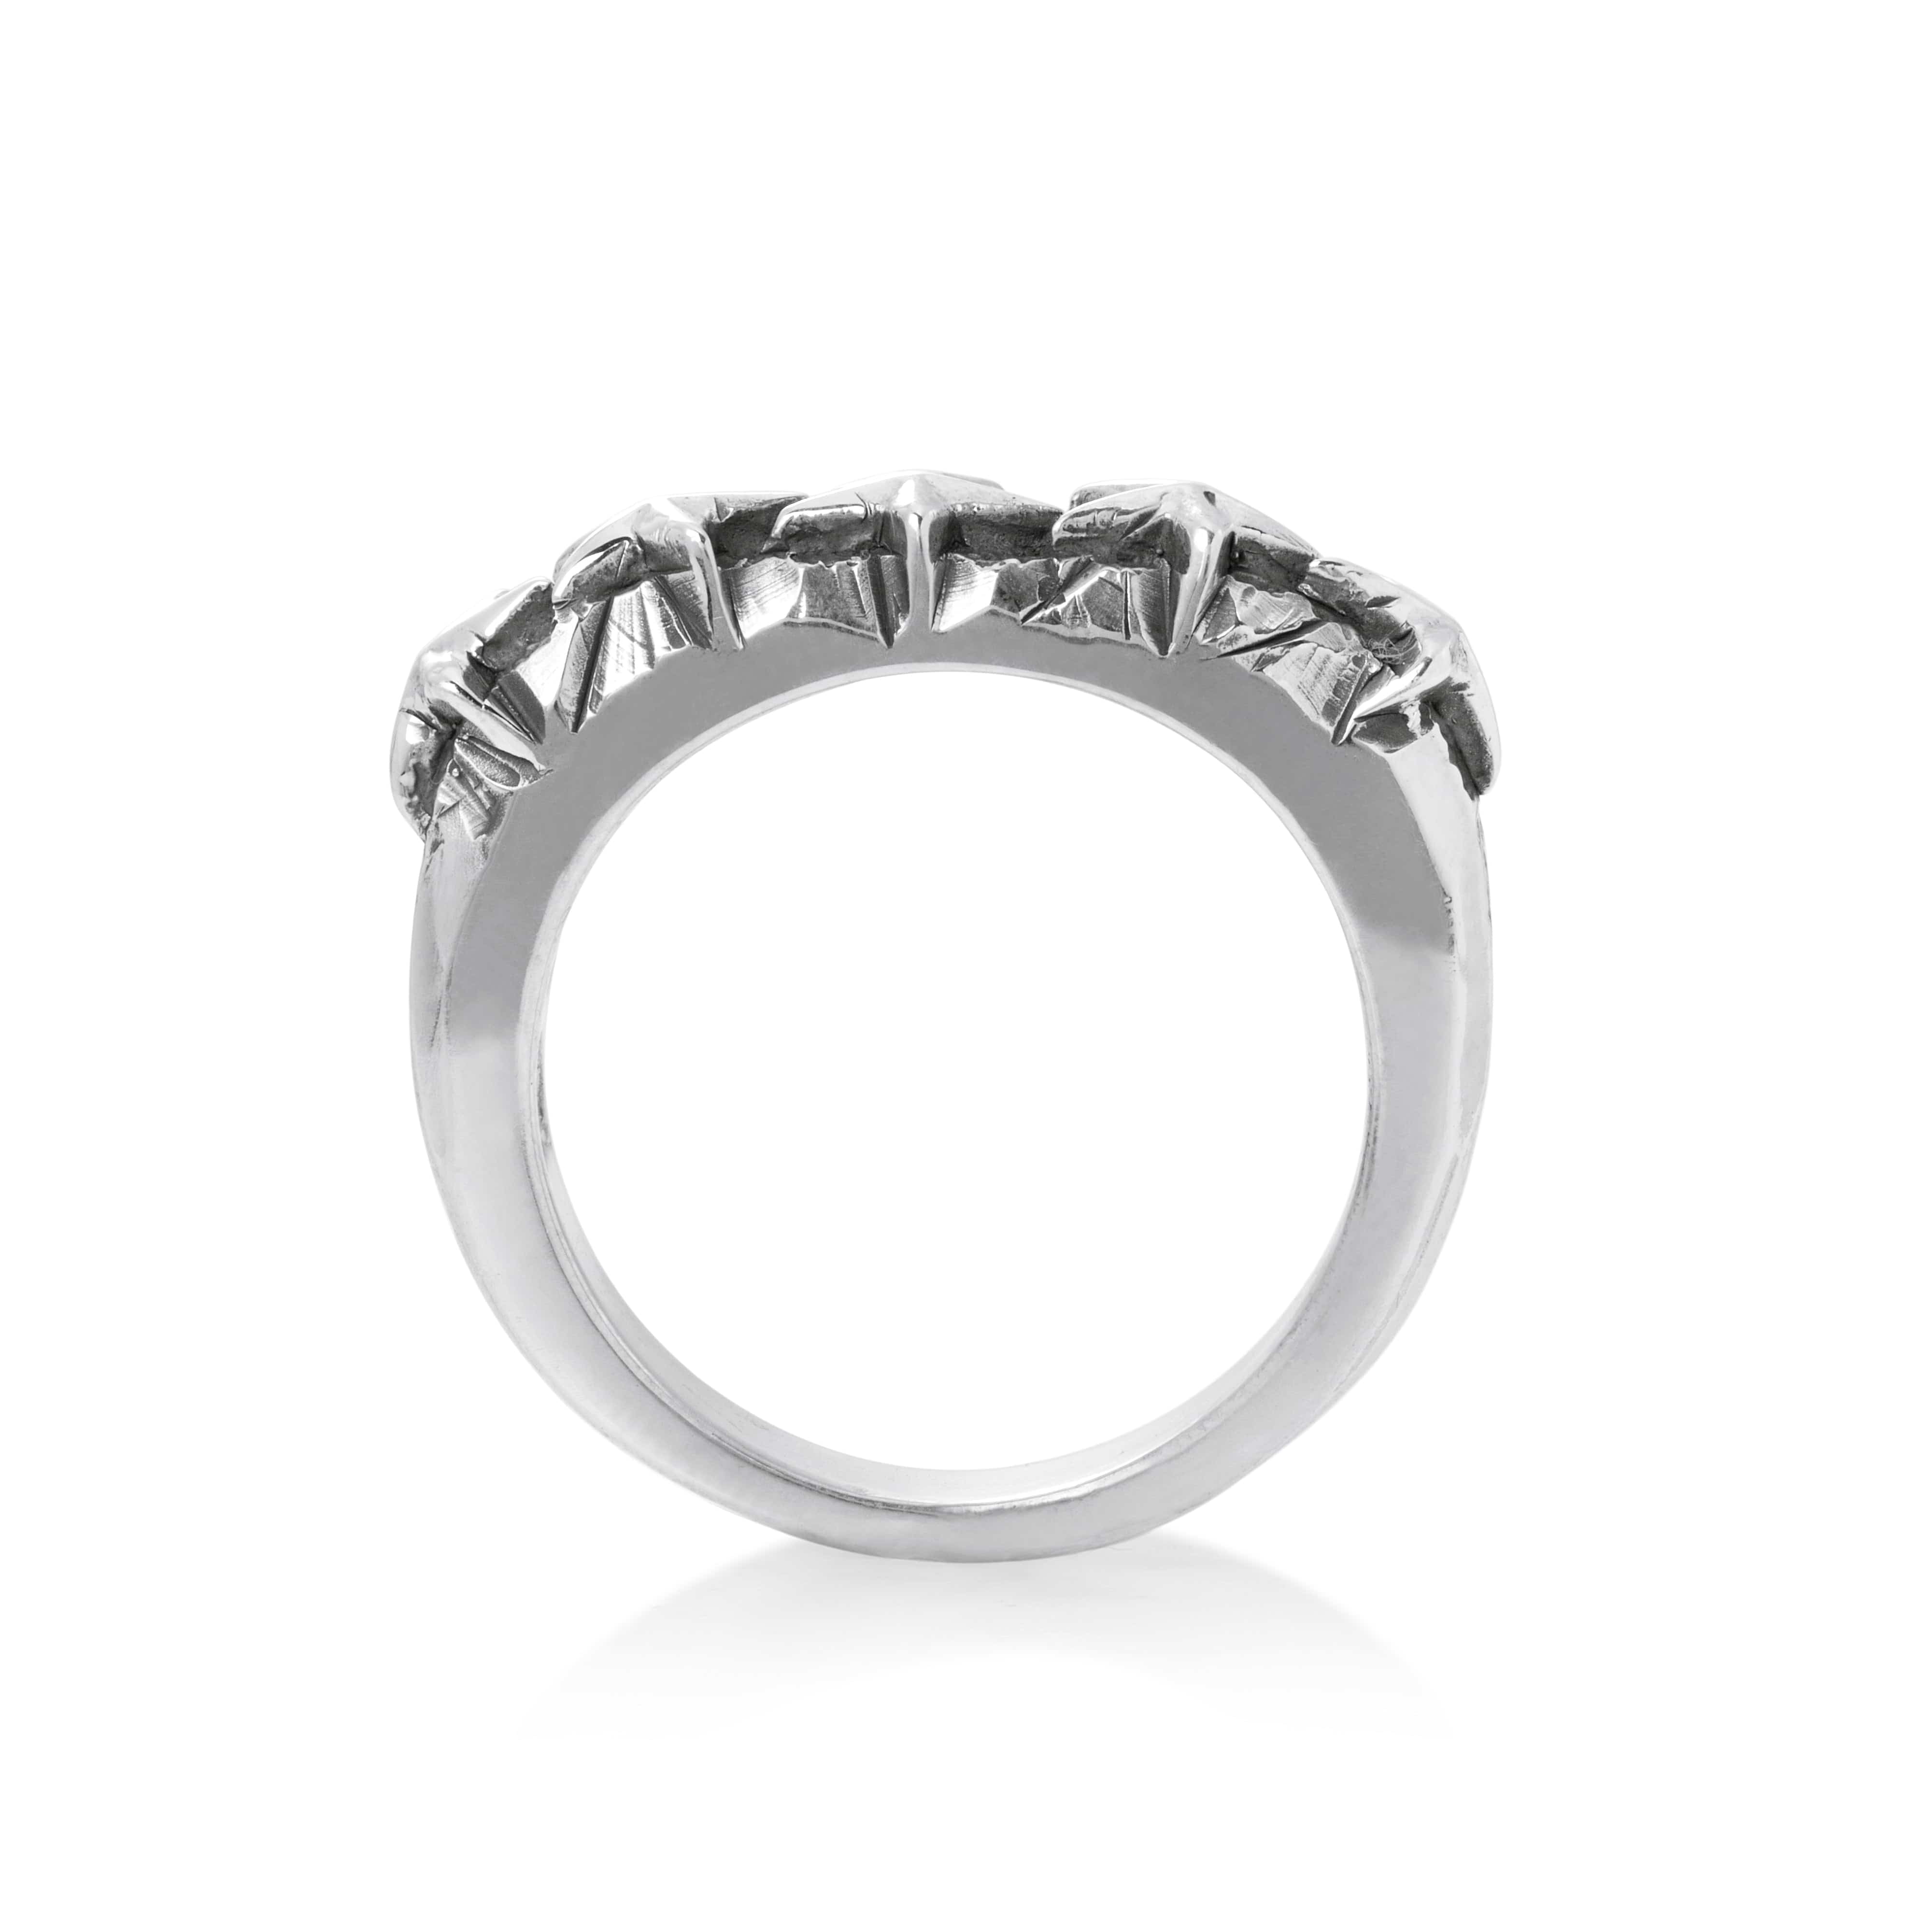 Solid Sterling Silver band decorated with five stars on the top of the ring